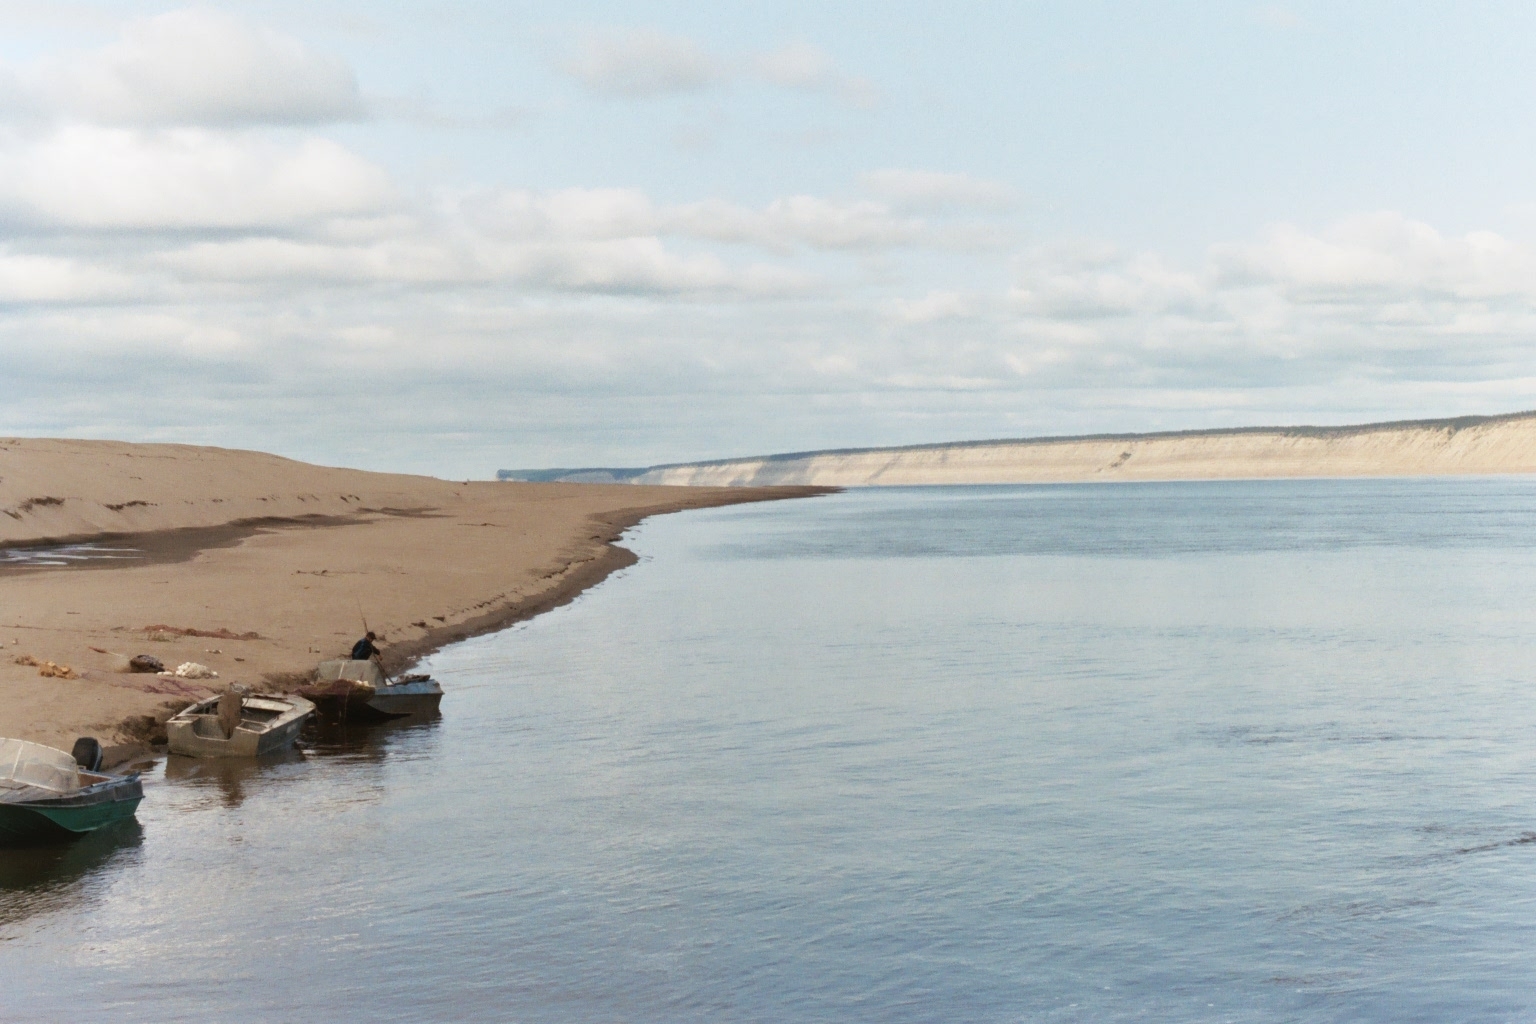 Image of the Lena River (Siberia) in 2003. The small boats along the shoreline were being used by local fisherman.